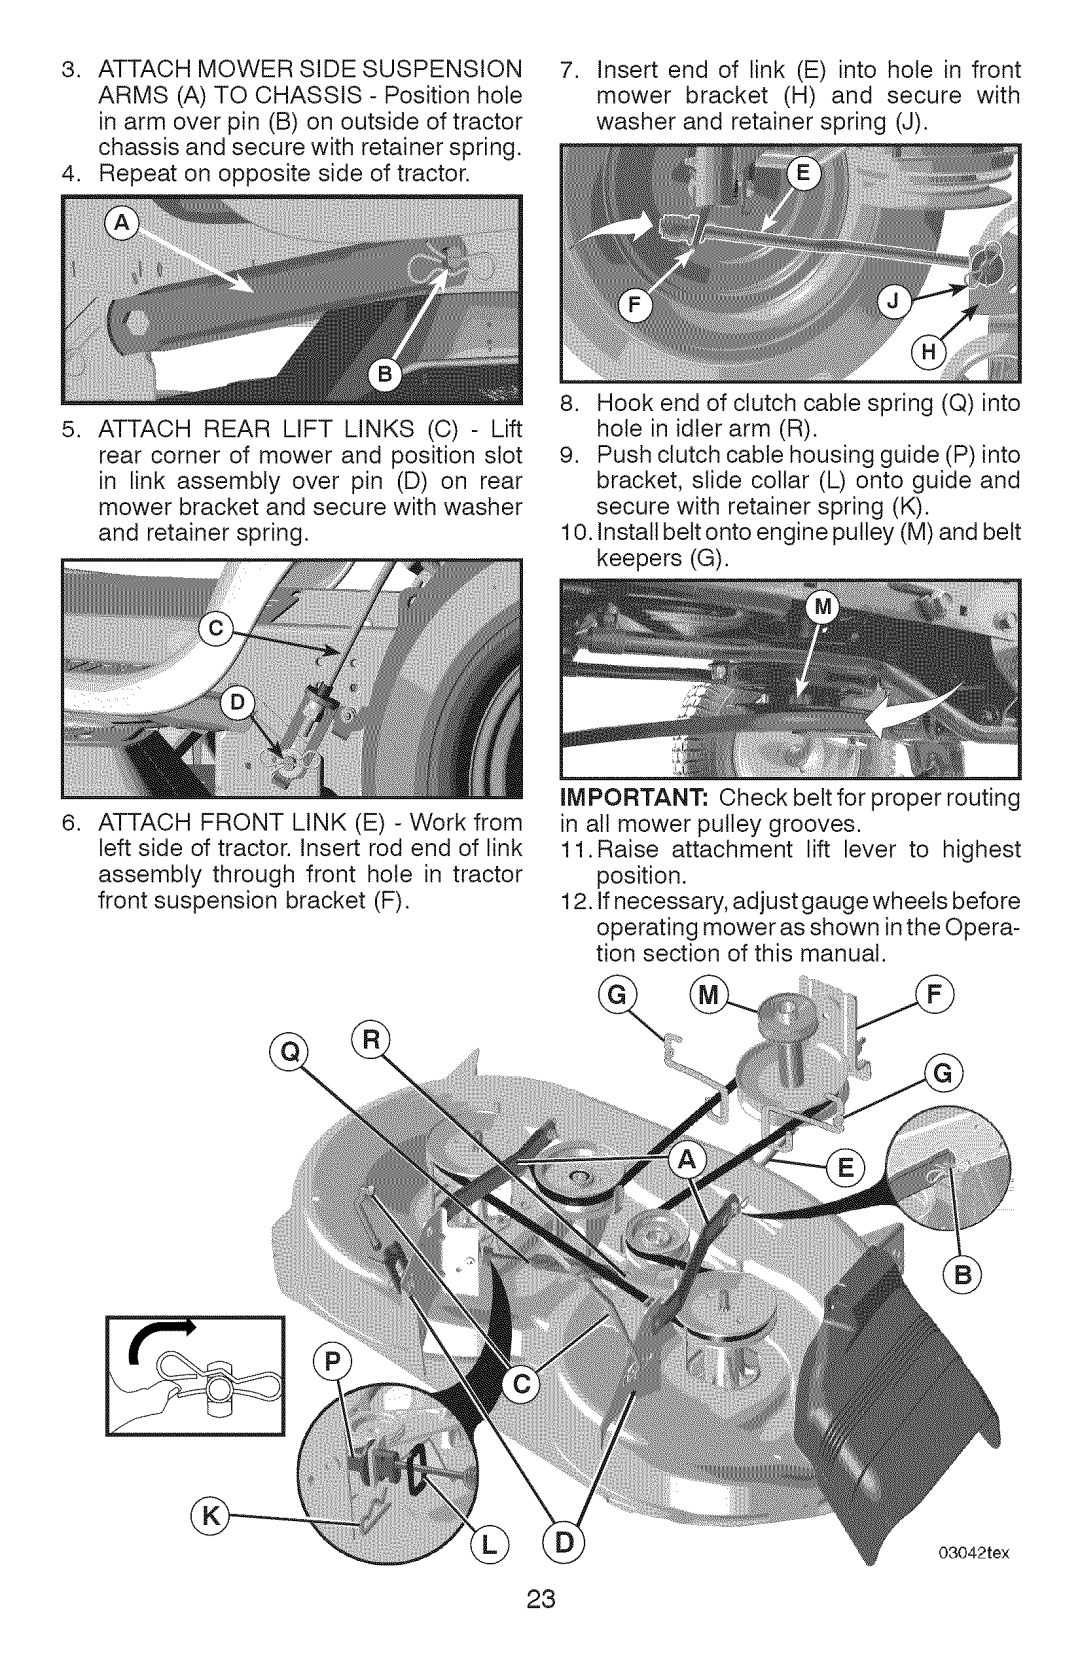 Craftsman 917.28927 manual Repeat on opposite side of tractor 